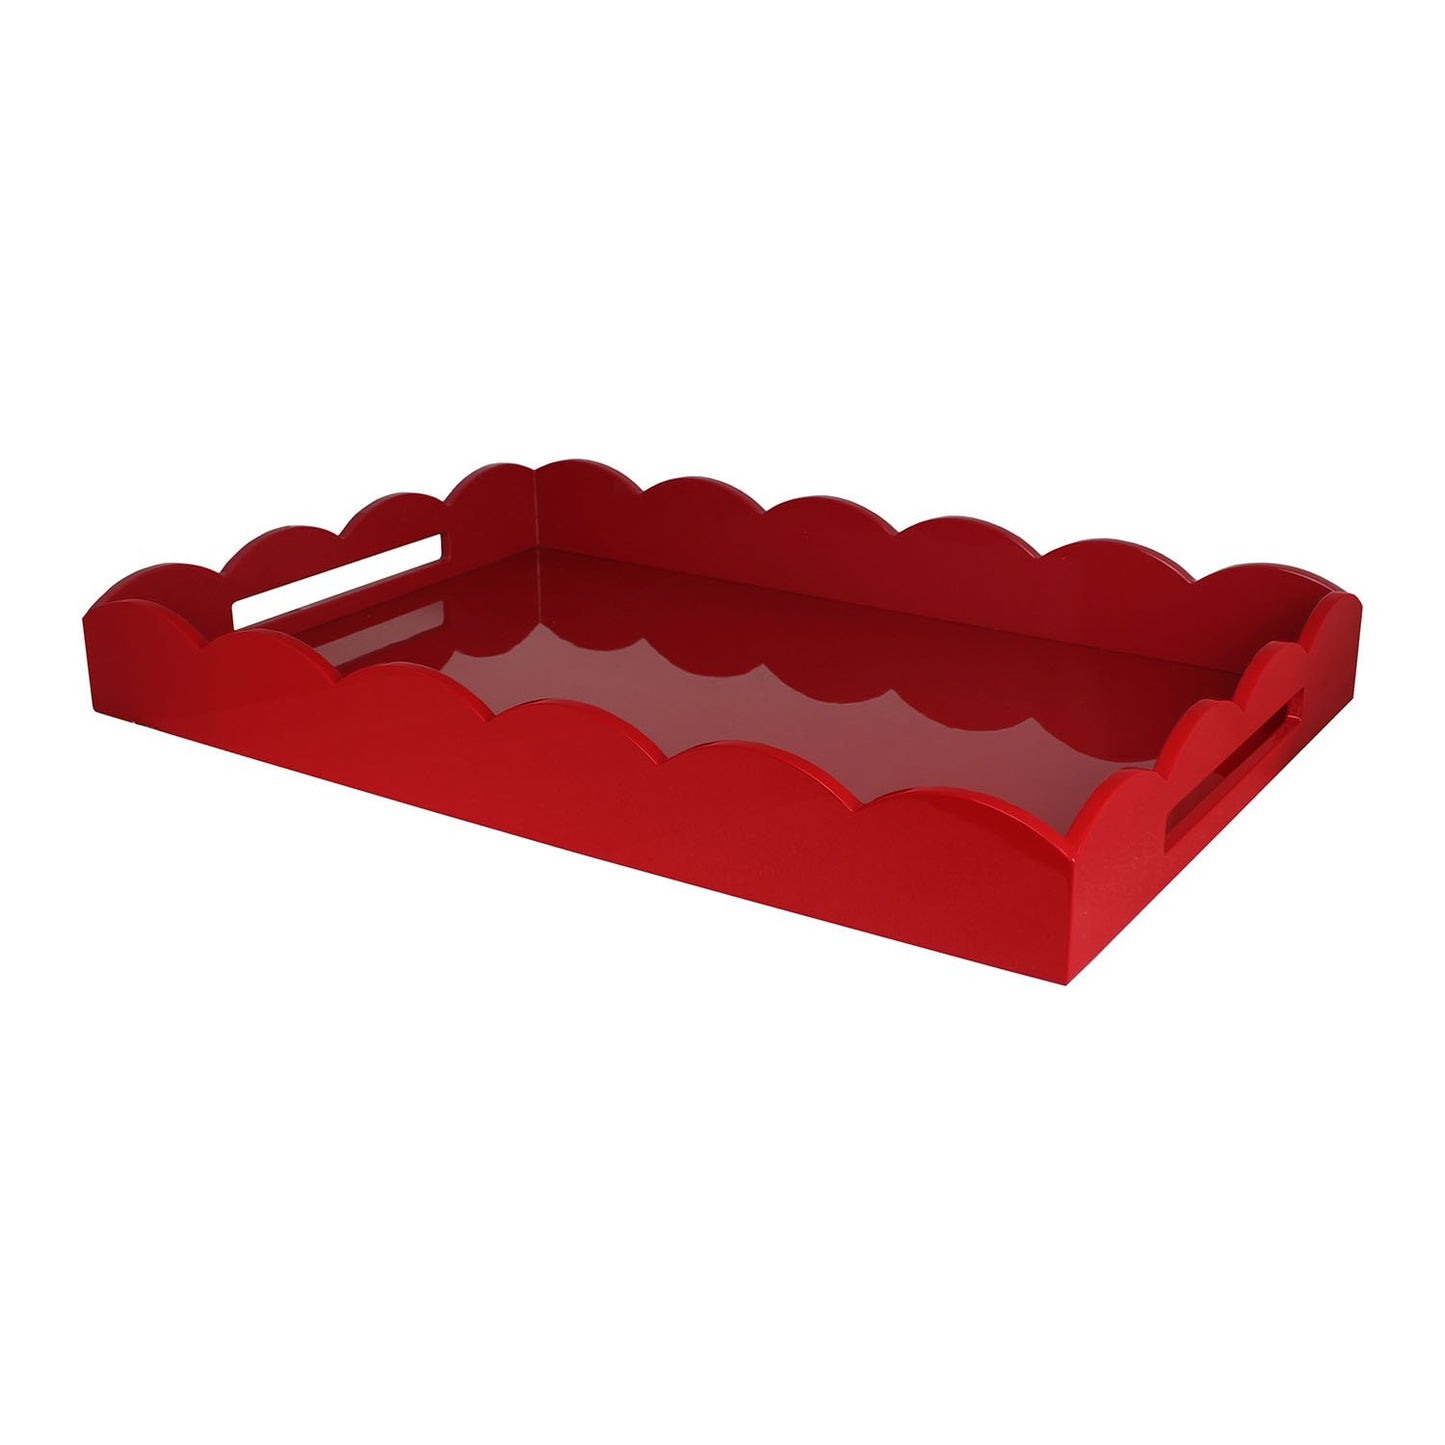 Burgundy Large Lacquered Scallop Ottoman Tray